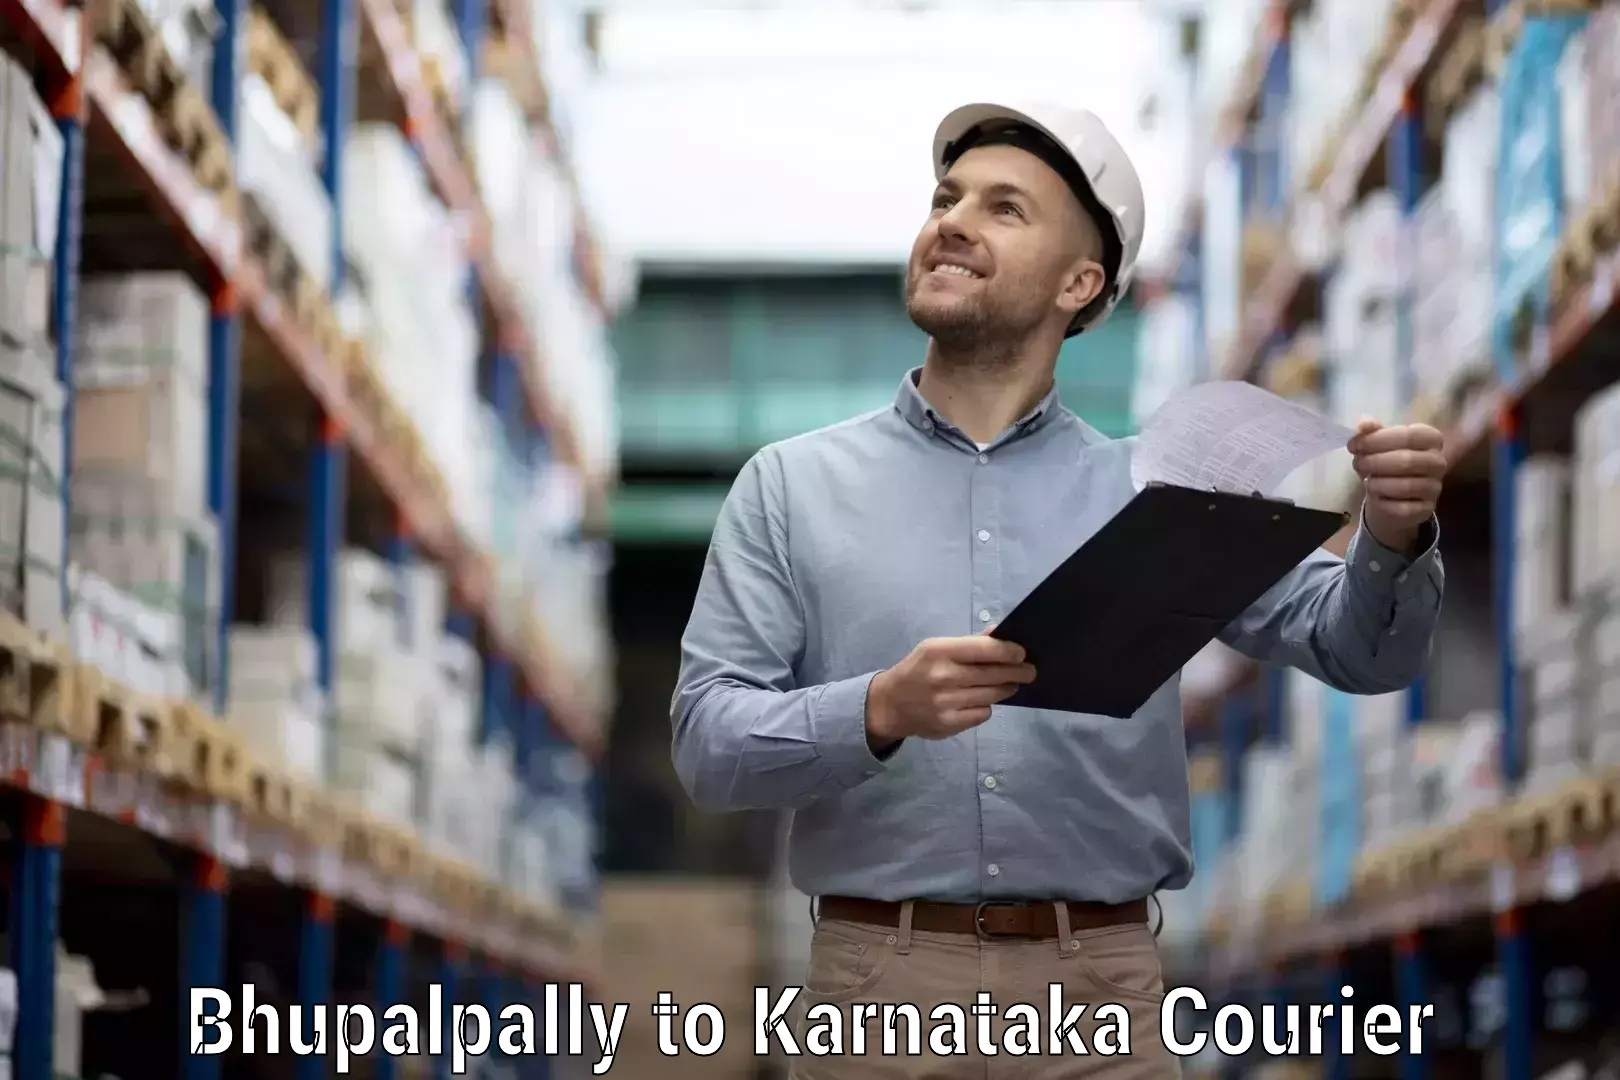 Courier app Bhupalpally to Bantwal